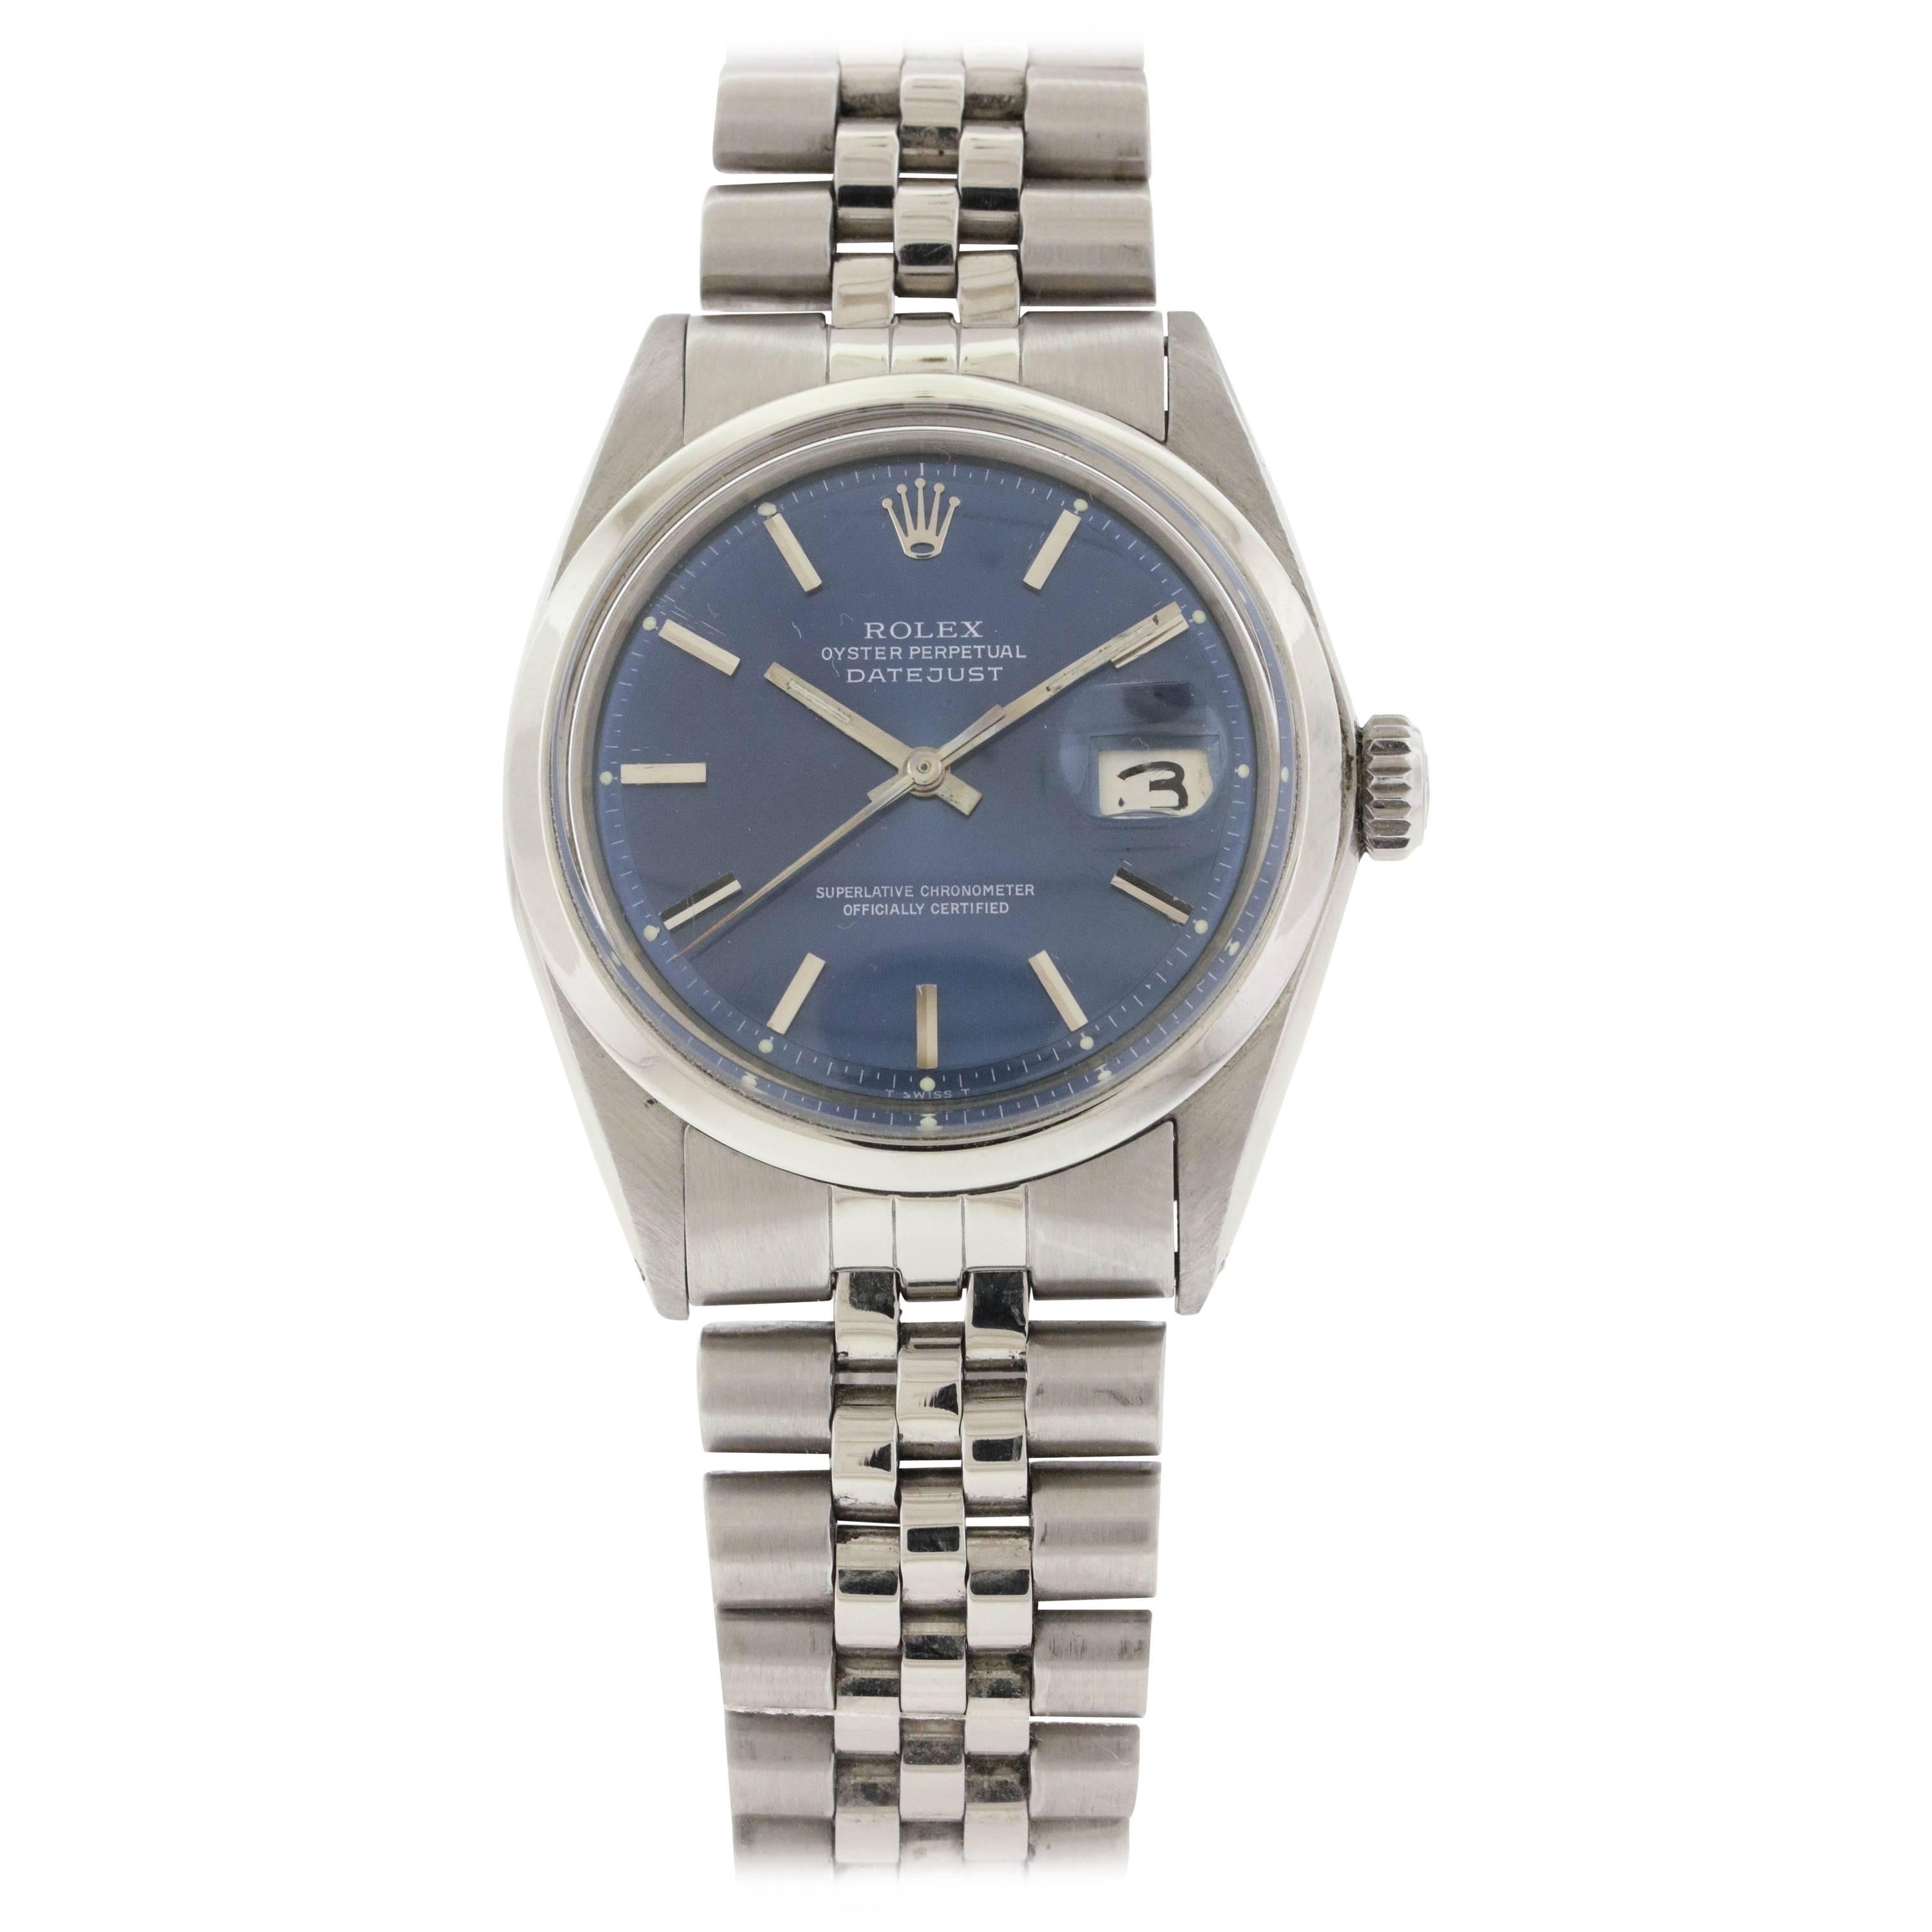 Rolex Stainless Steel Blue Dial Datejust Automatic Wristwatch Ref 1600 